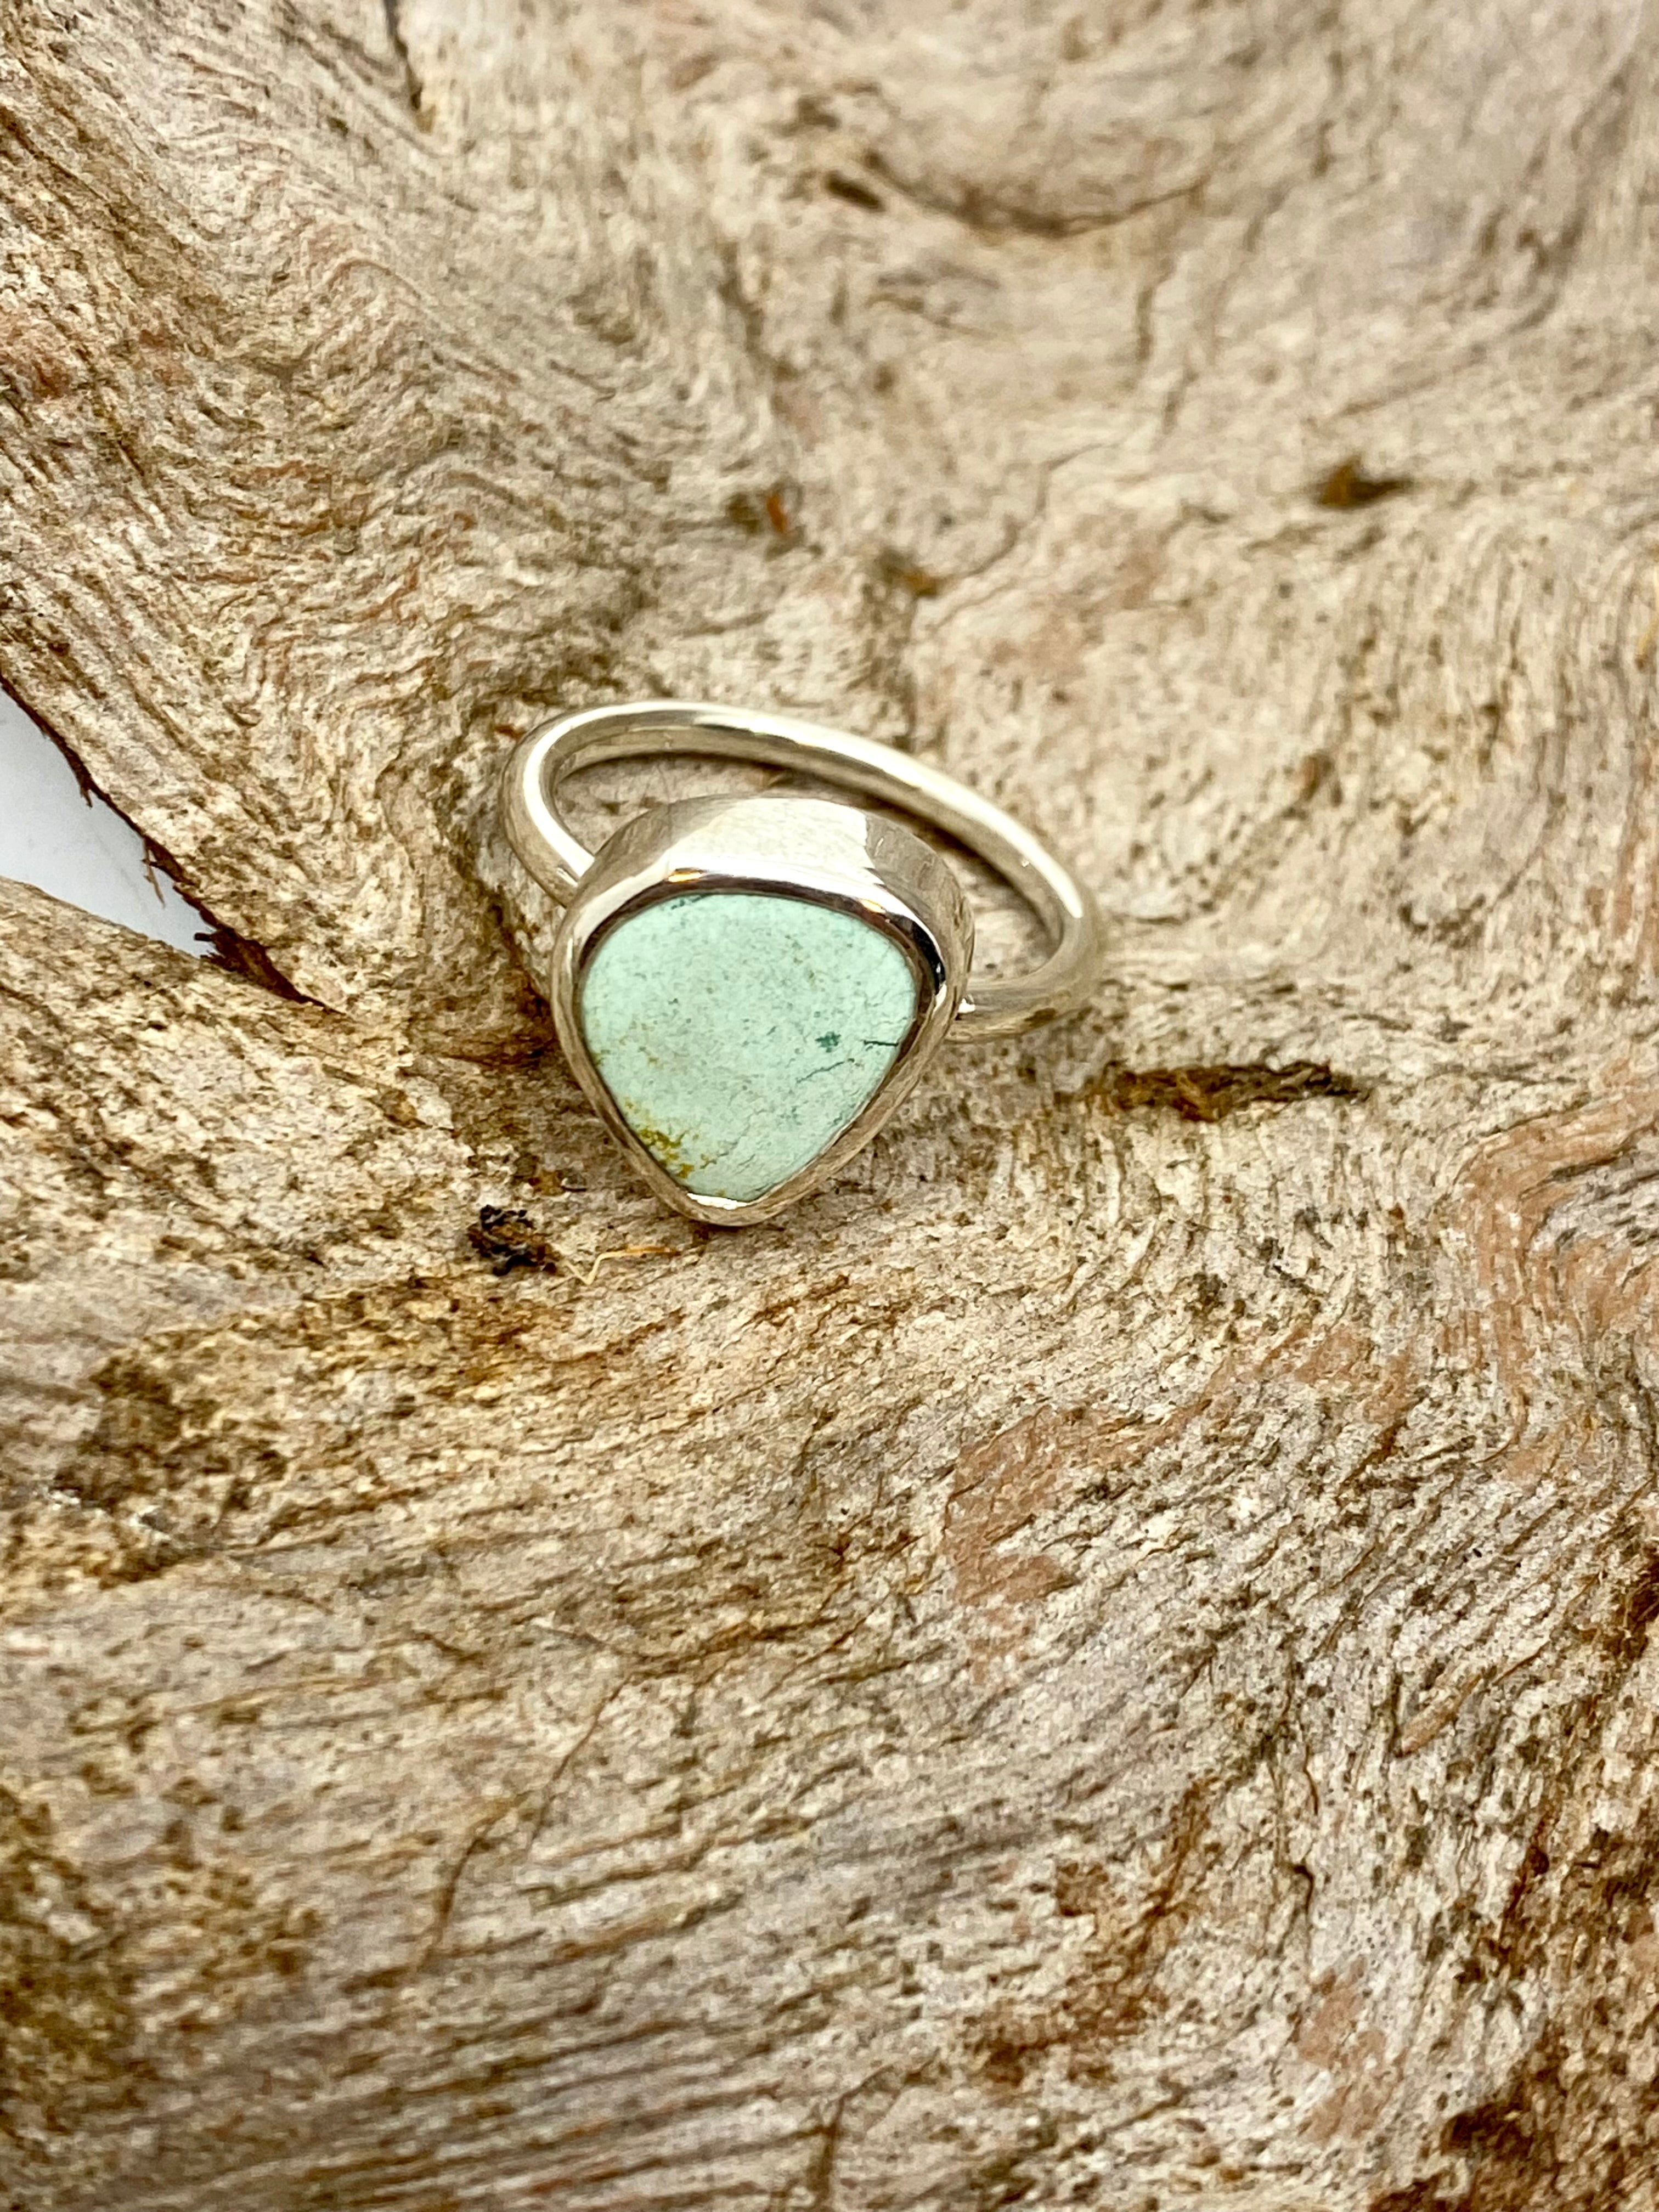 Freeform Australian Turquoise Ring Decorative Set - Sterling Silver - Size 7 or O